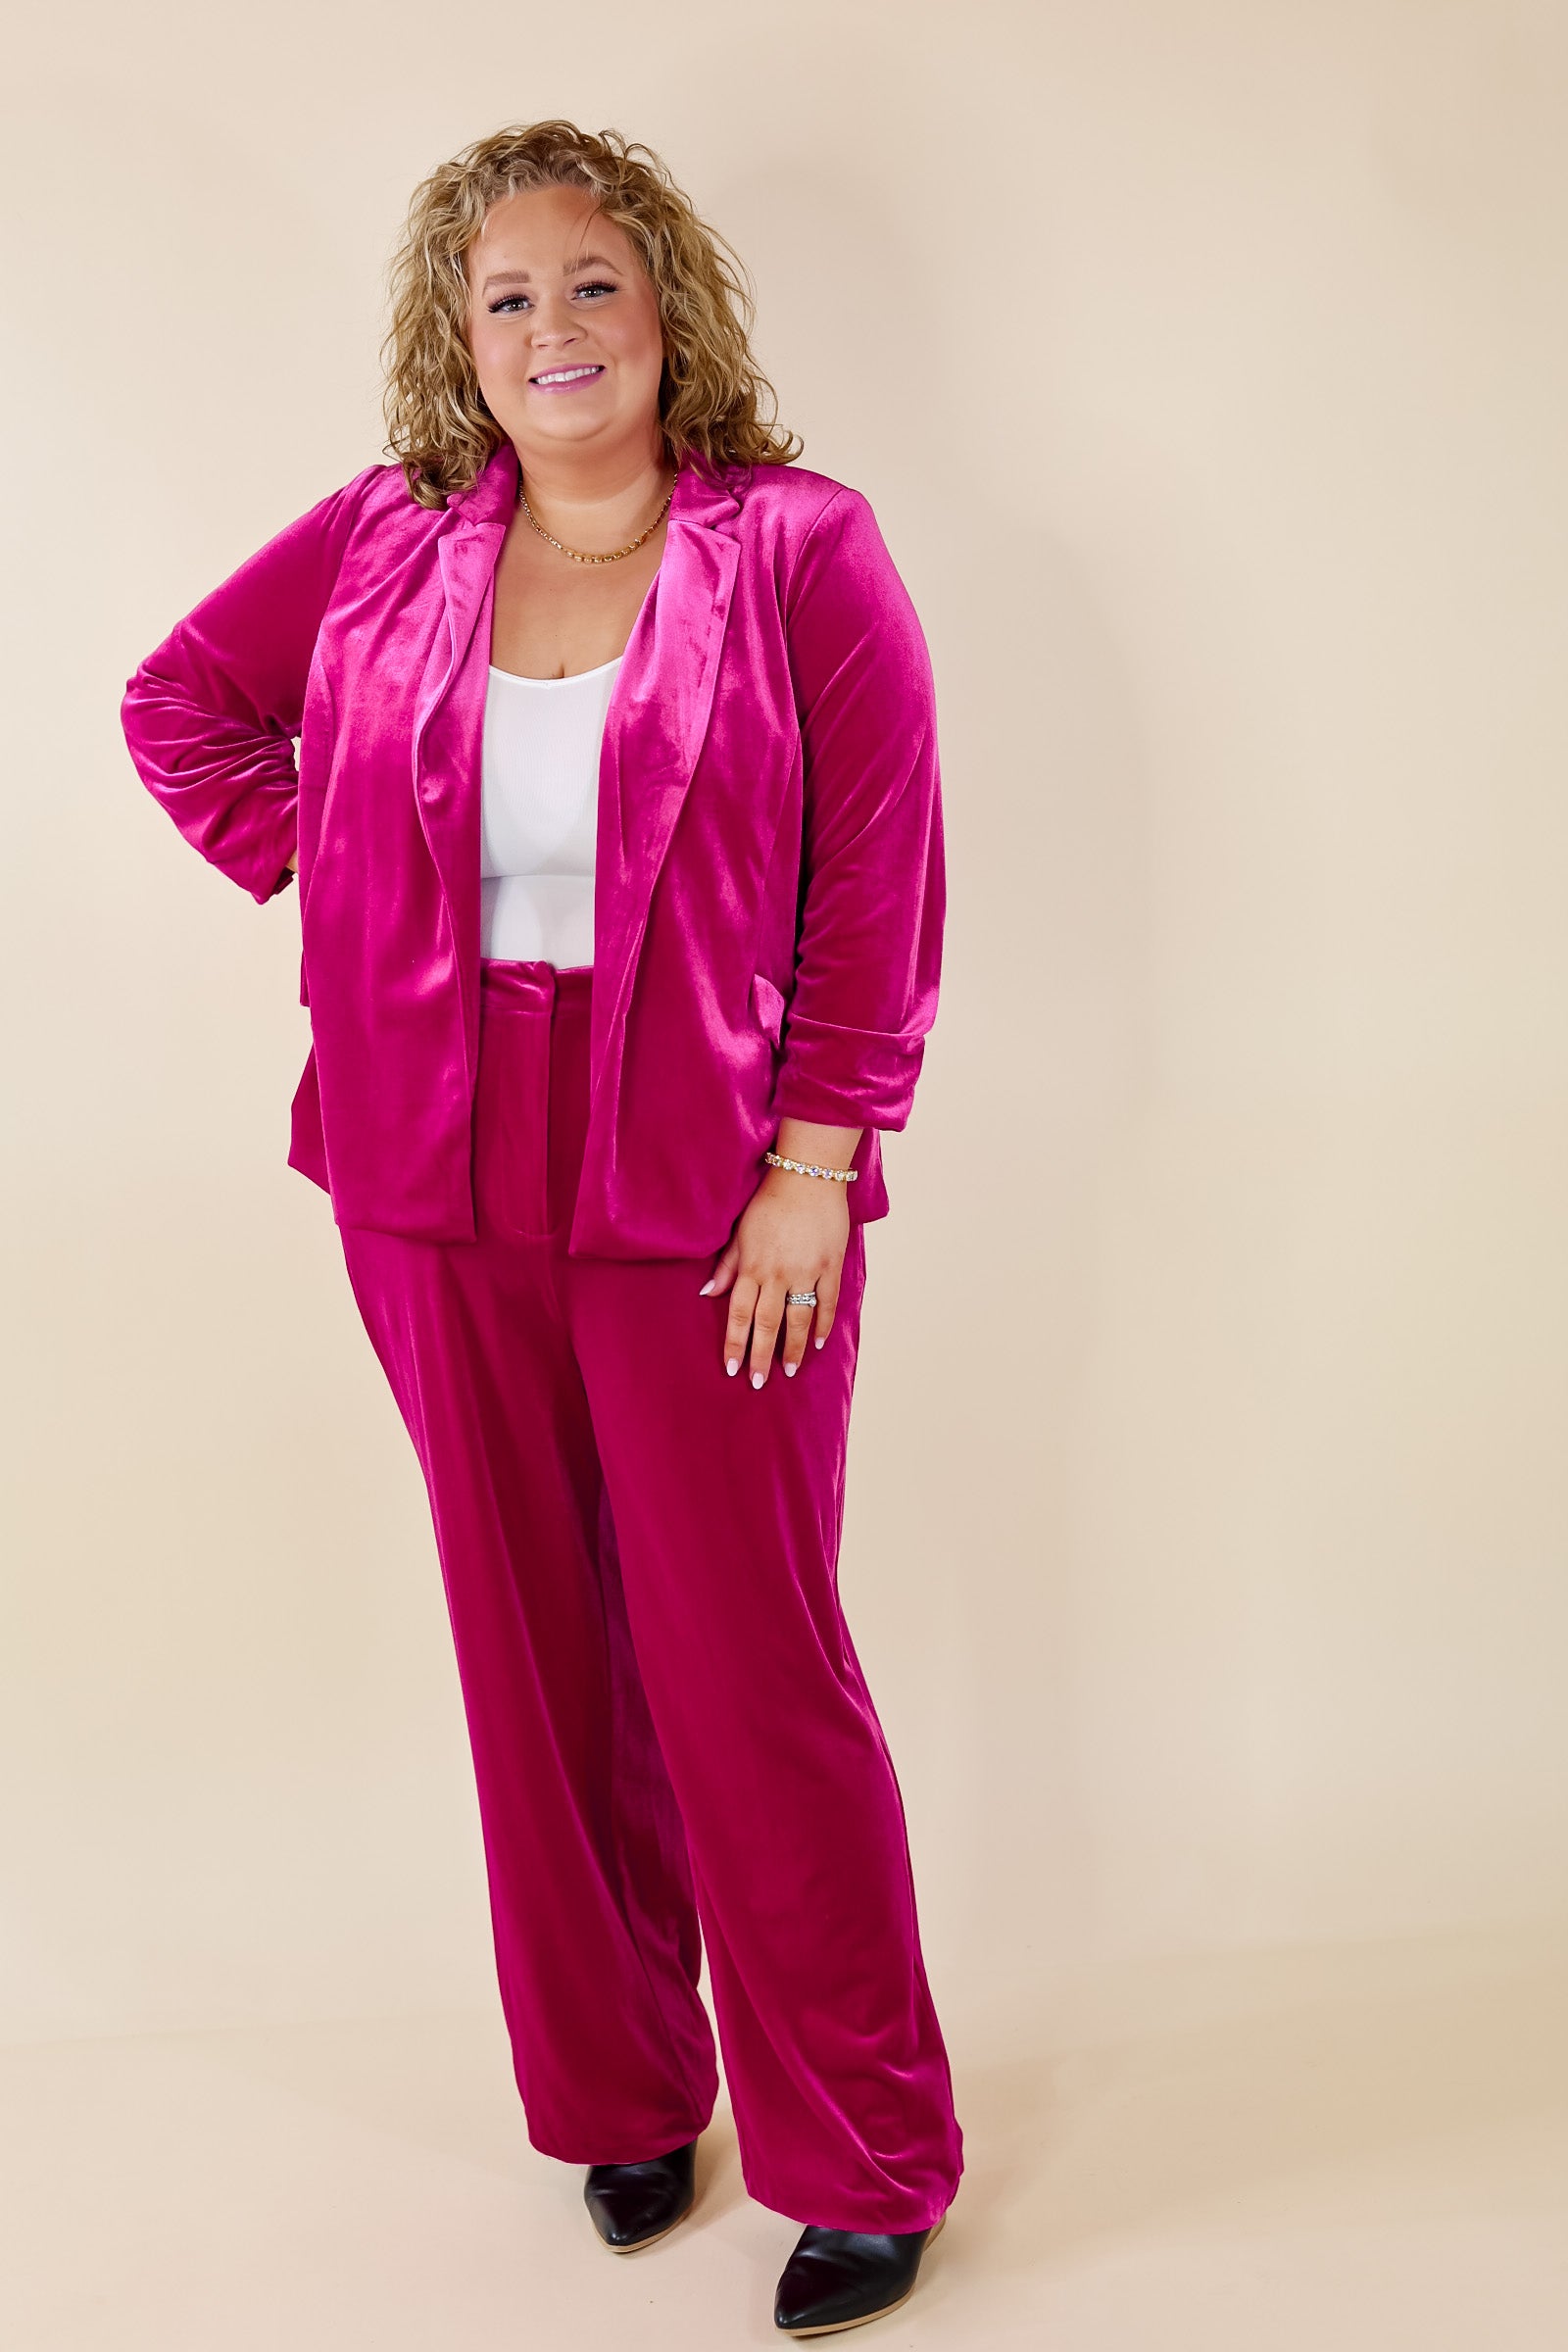 Chic Arrival 3/4 Sleeve Velvet Blazer in Fuchsia Pink - Giddy Up Glamour Boutique